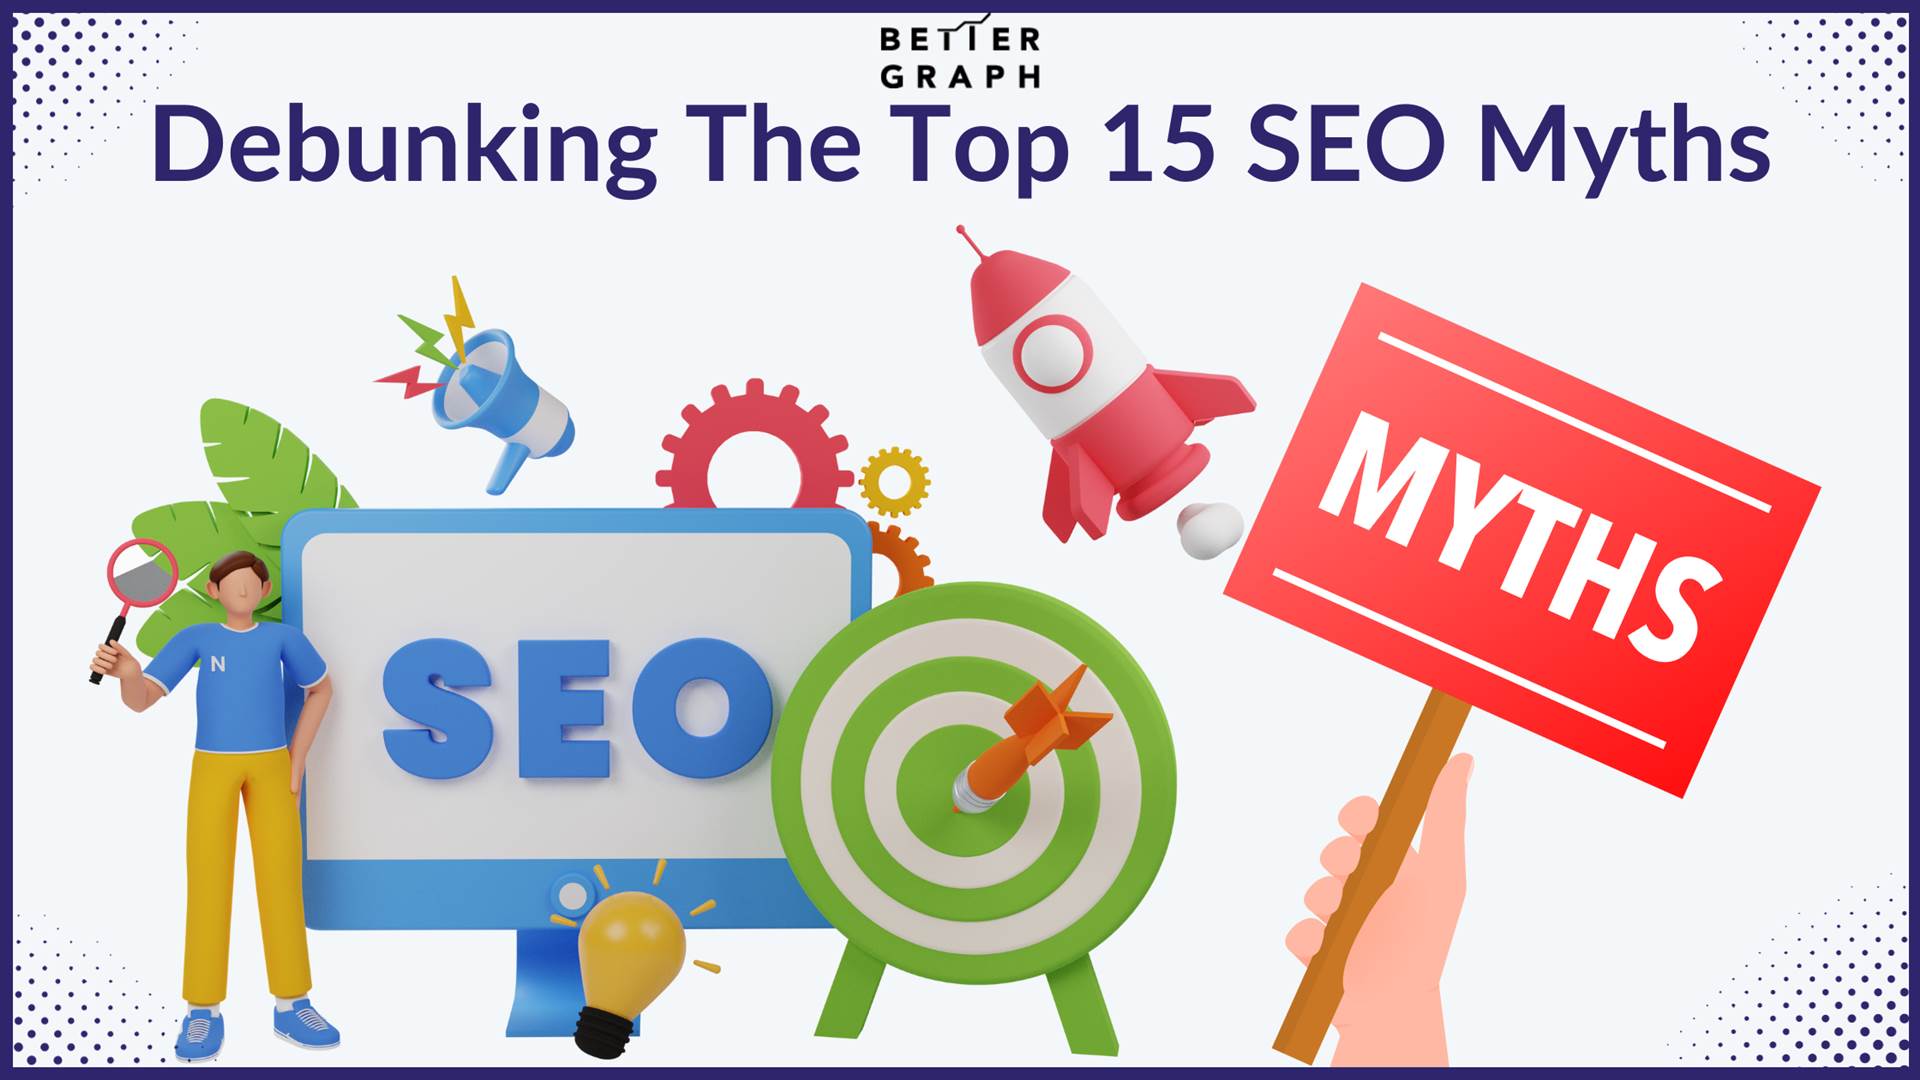 Debunking The Top 15 SEO Myths (1).png  by BetterGraph